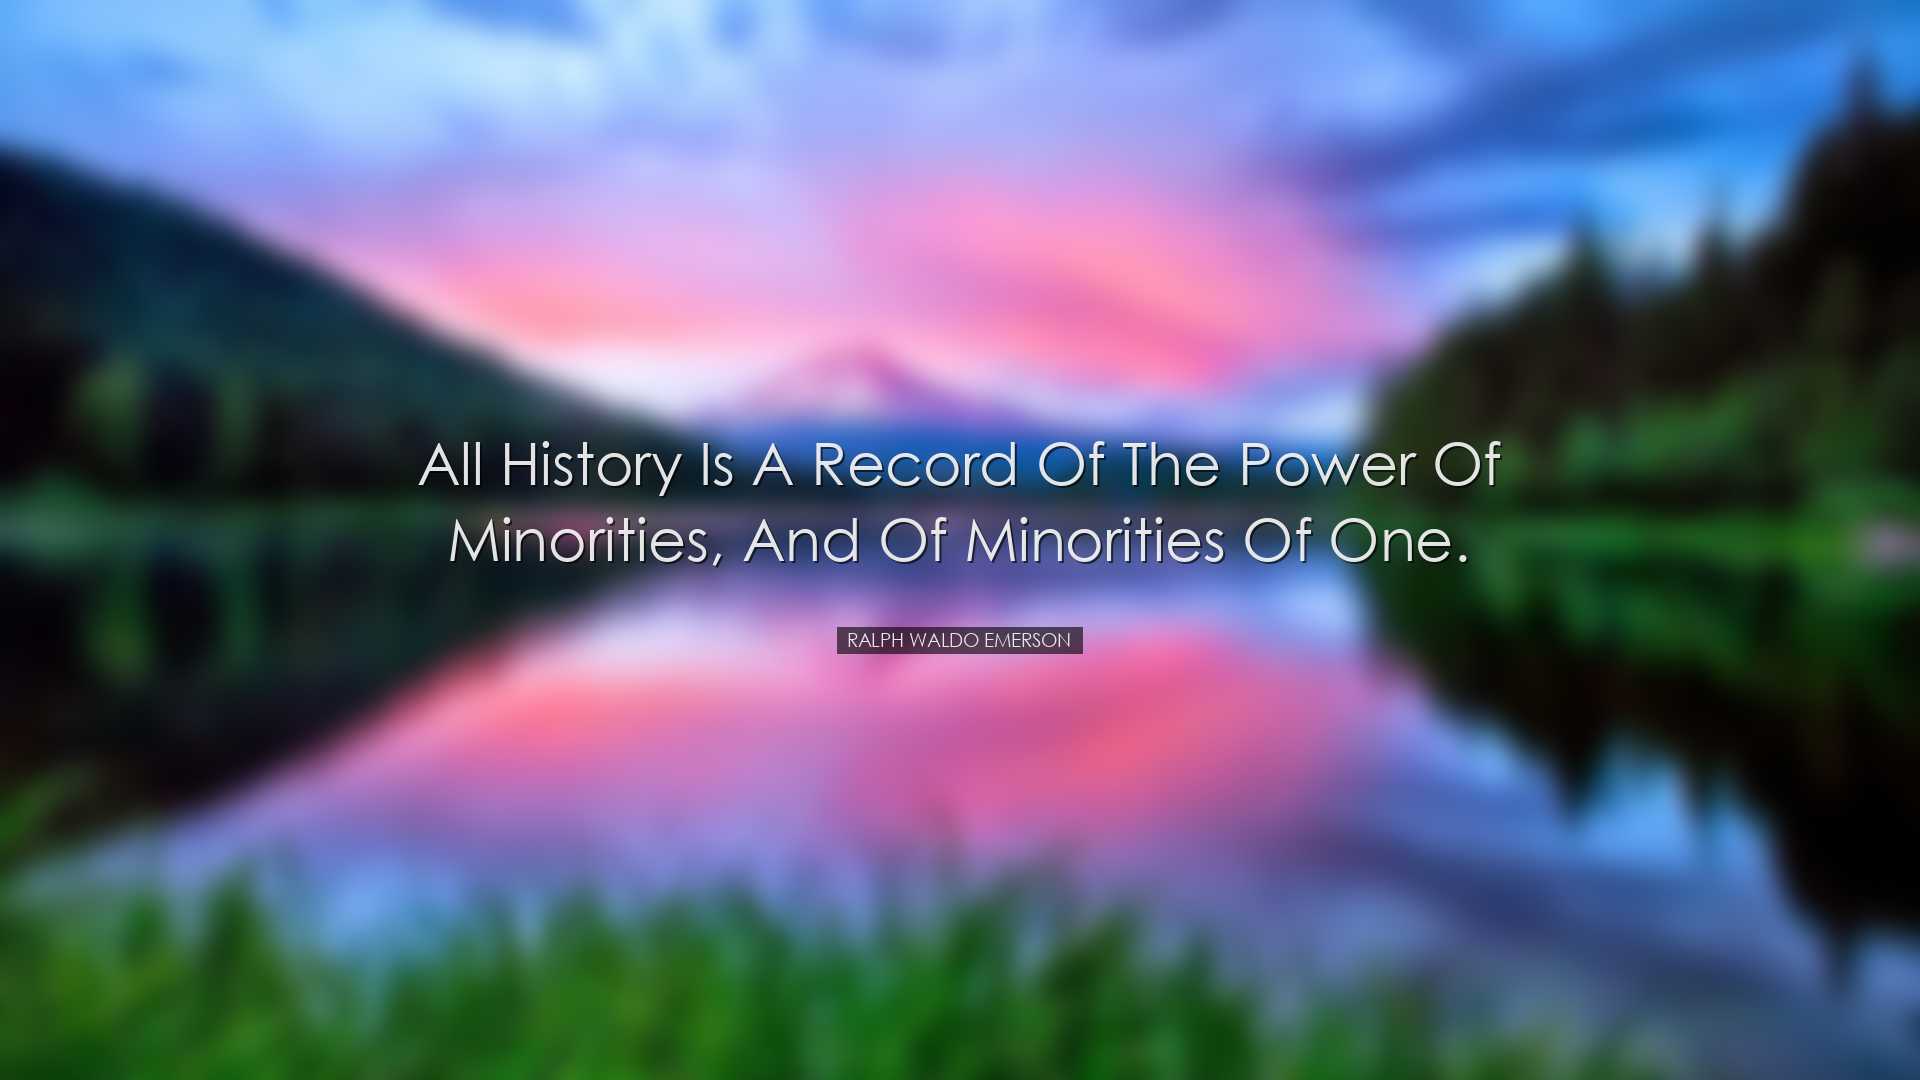 All history is a record of the power of minorities, and of minorit